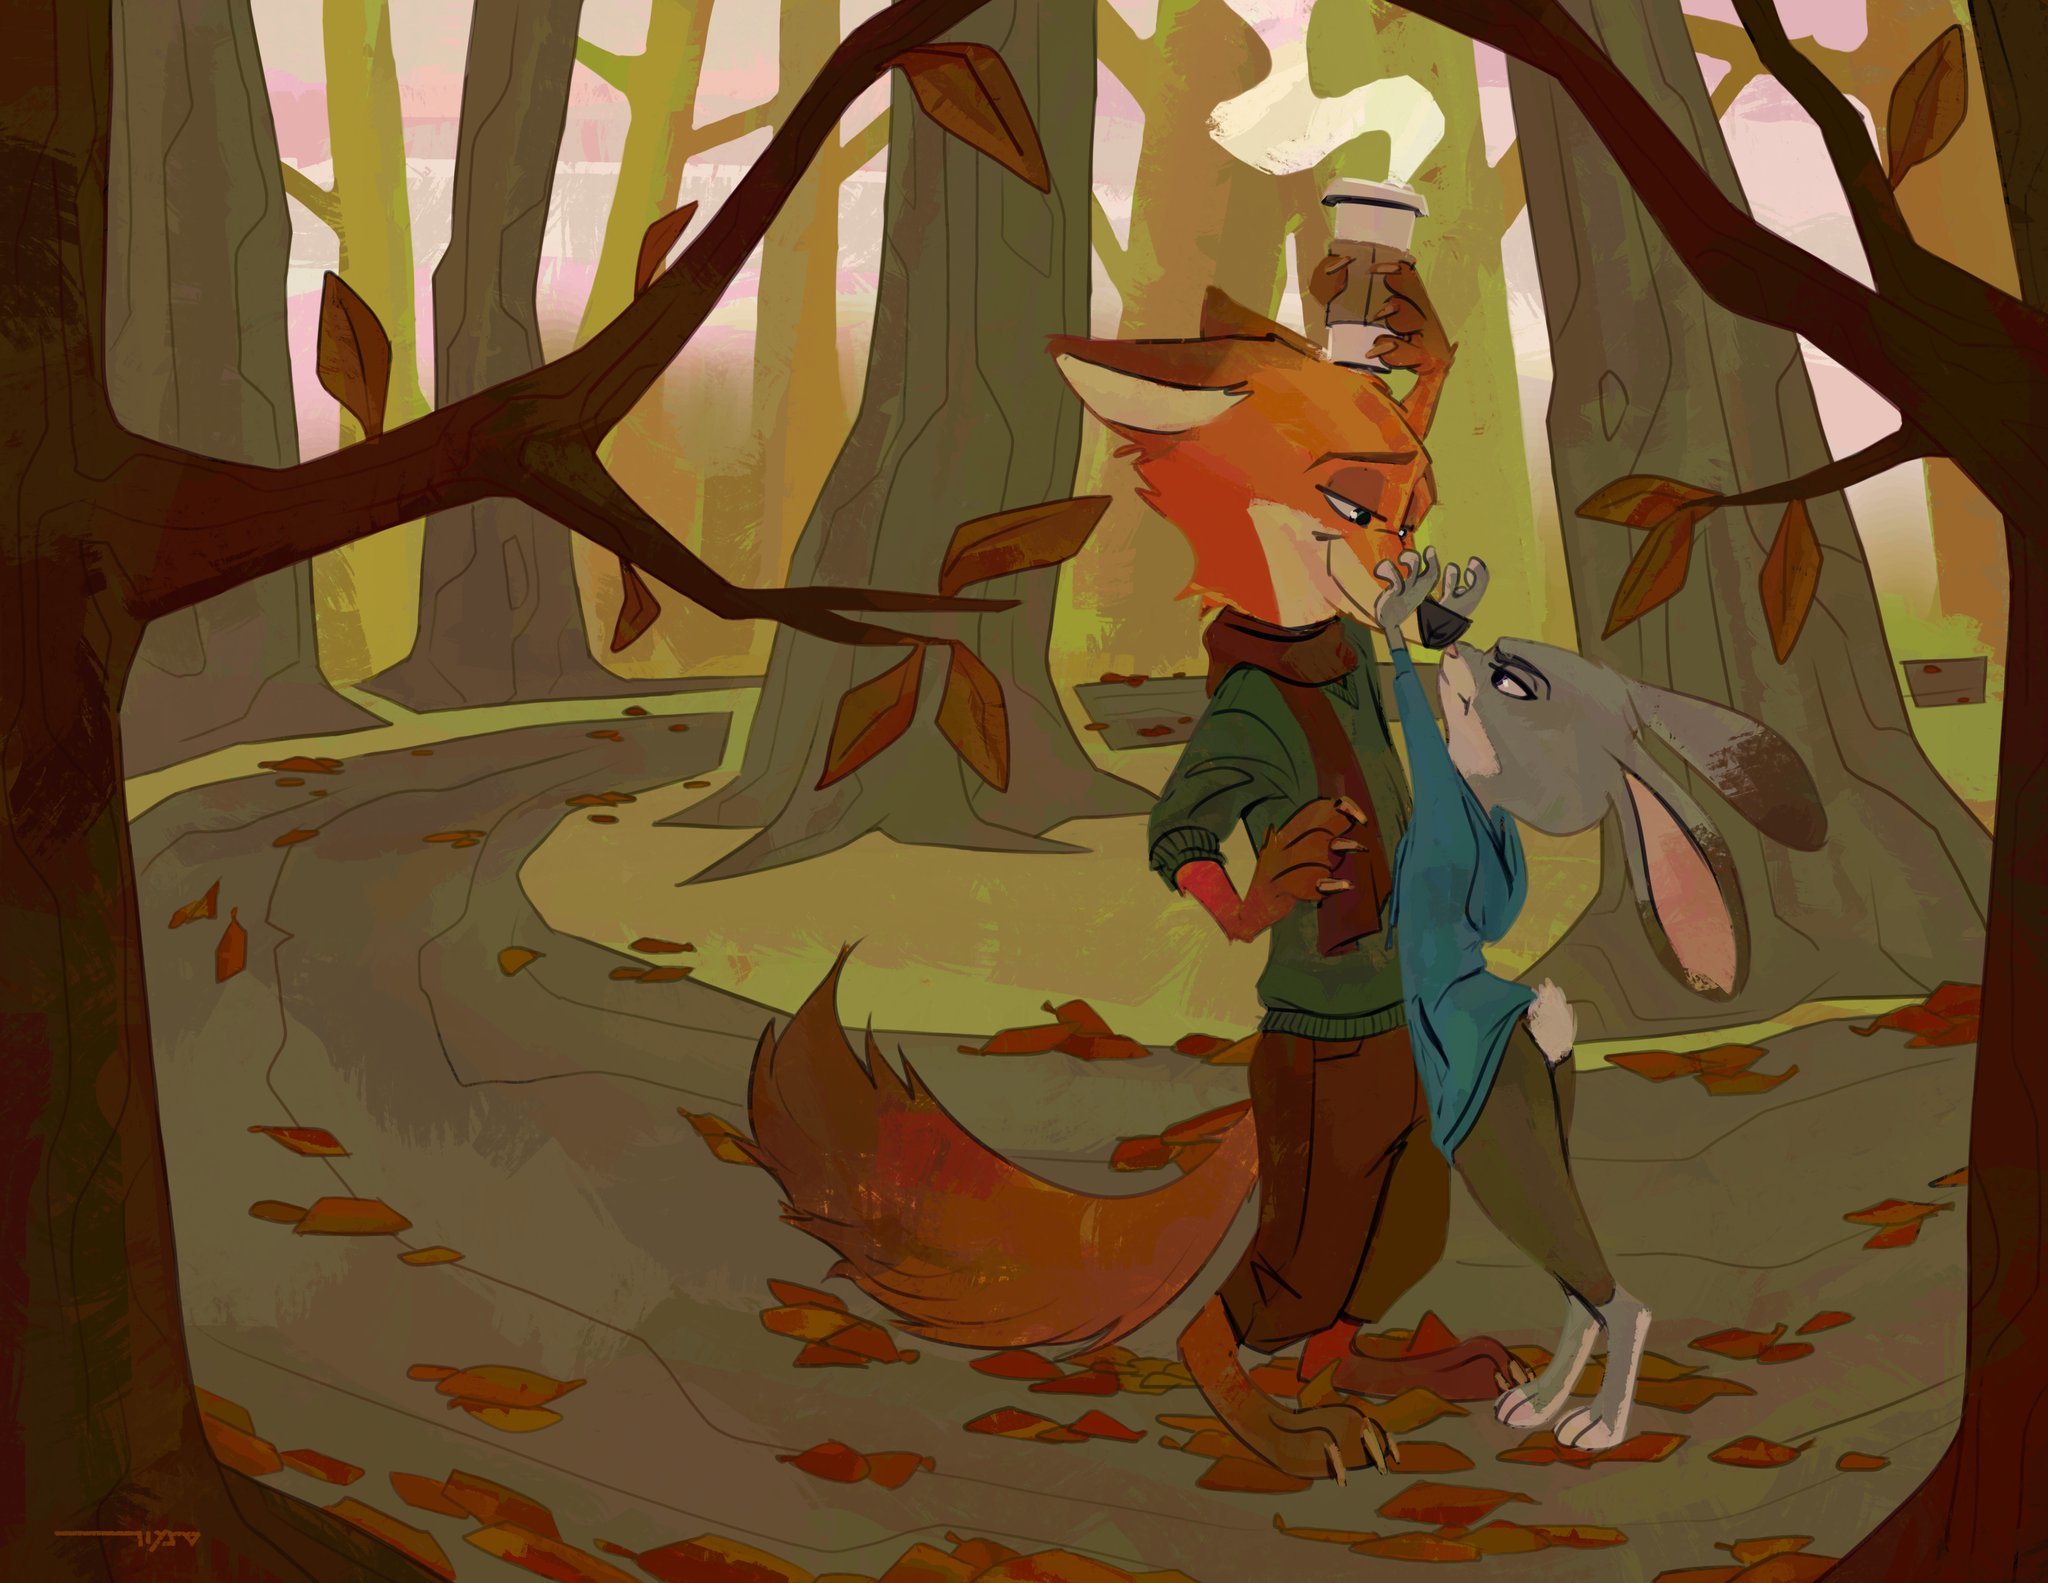 With the first day of autumn! - Zootopia, Nick and Judy, Nick wilde, Judy hopps, Autumn, Forest, Art, Samur Shalem